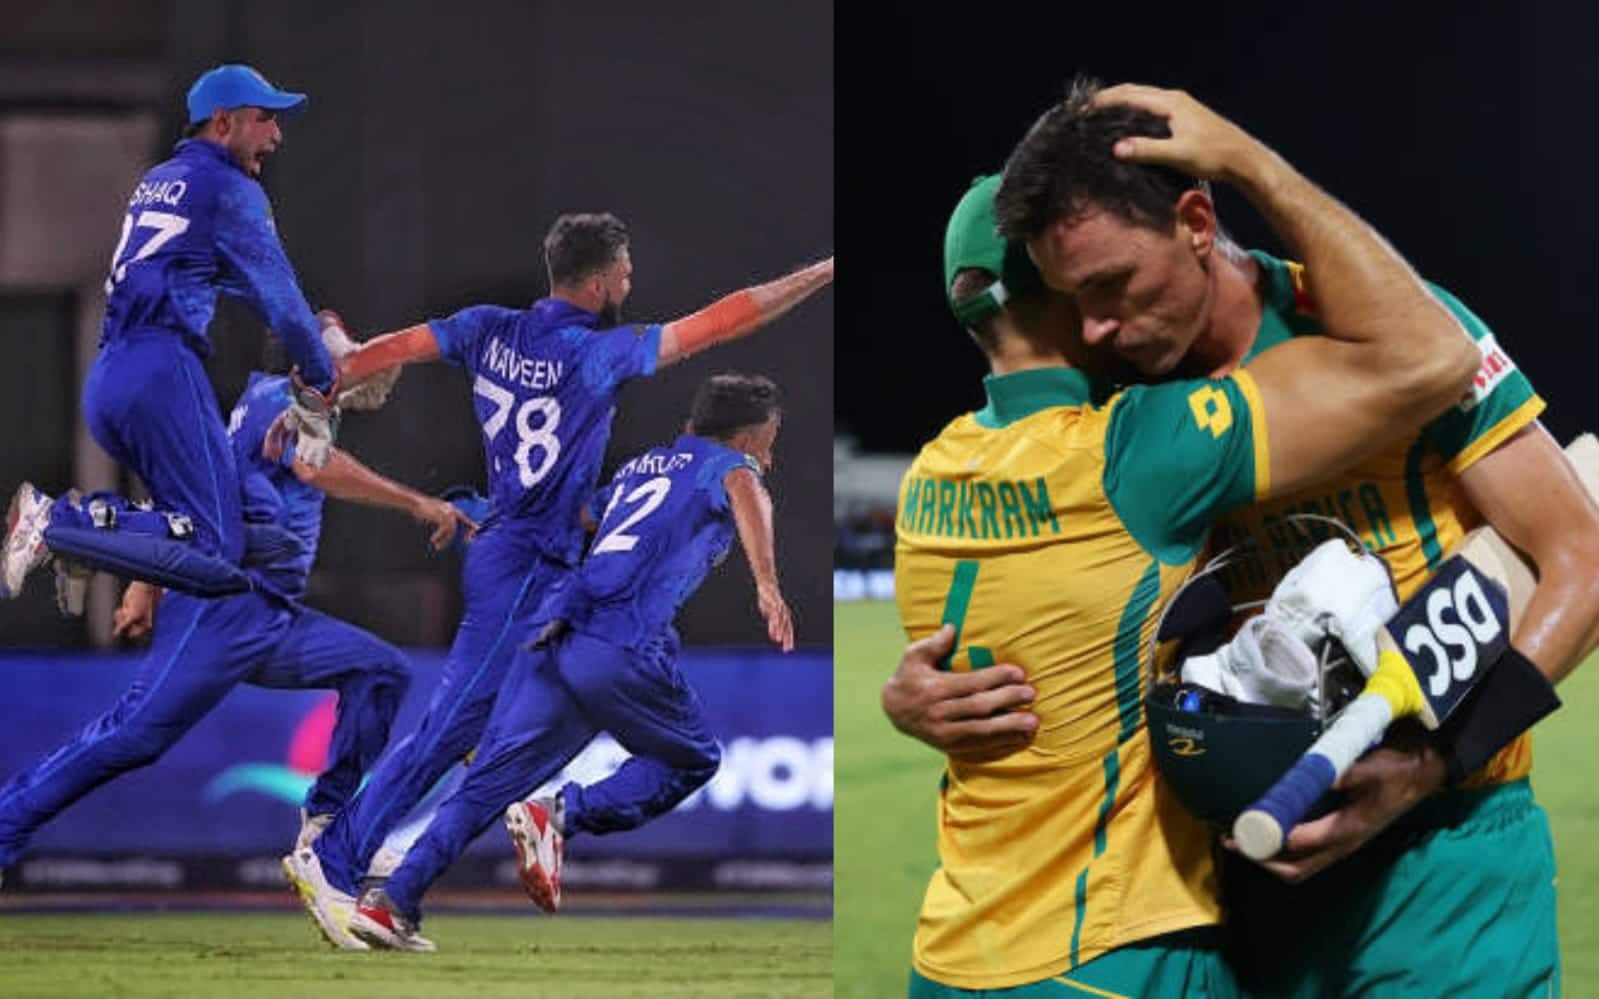 Afghanistan will face South Africa in semi-final 1 on June 26